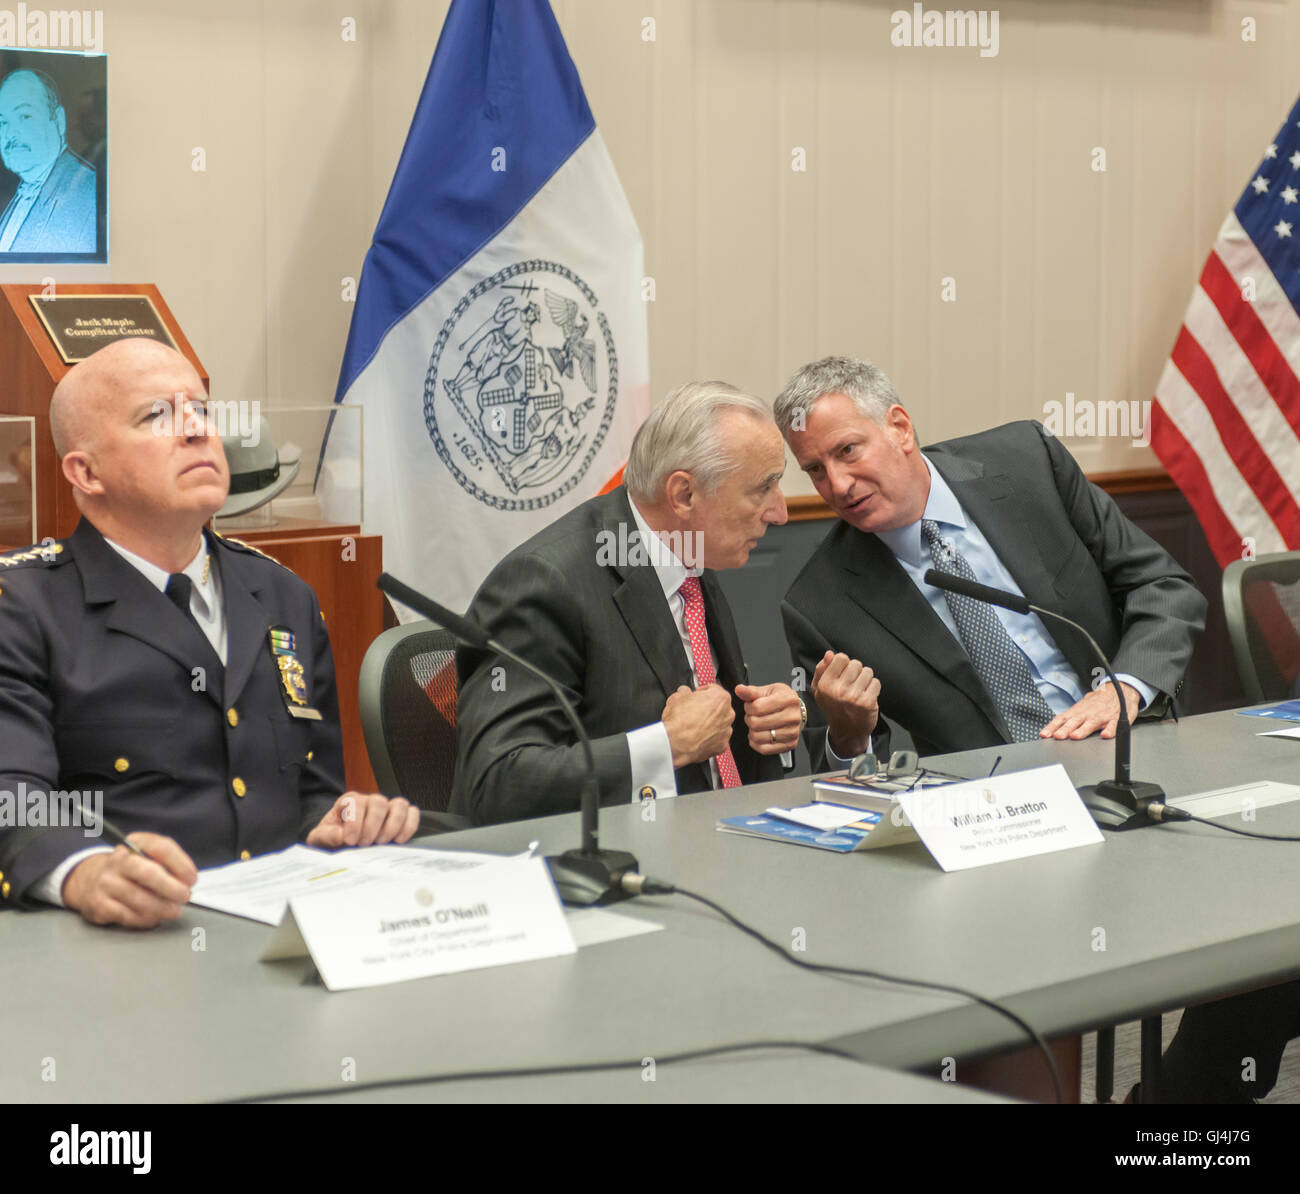 New York Mayor Bill de Blasio, right, and NYPD Commissioner William Bratton, center, and Chief of Department Jimmy O'Neill report to the press in the Jack Maples Compstat Room at One Police Plaza in New York on Thursday, August 4, 2016. The officials answered police related questions from the press as well as briefing the media on the ongoing decrease in violent crime in the city. O'Neill is to take over as commissioner in September when Bratton leaves. (© Richard B. Levine) Stock Photo